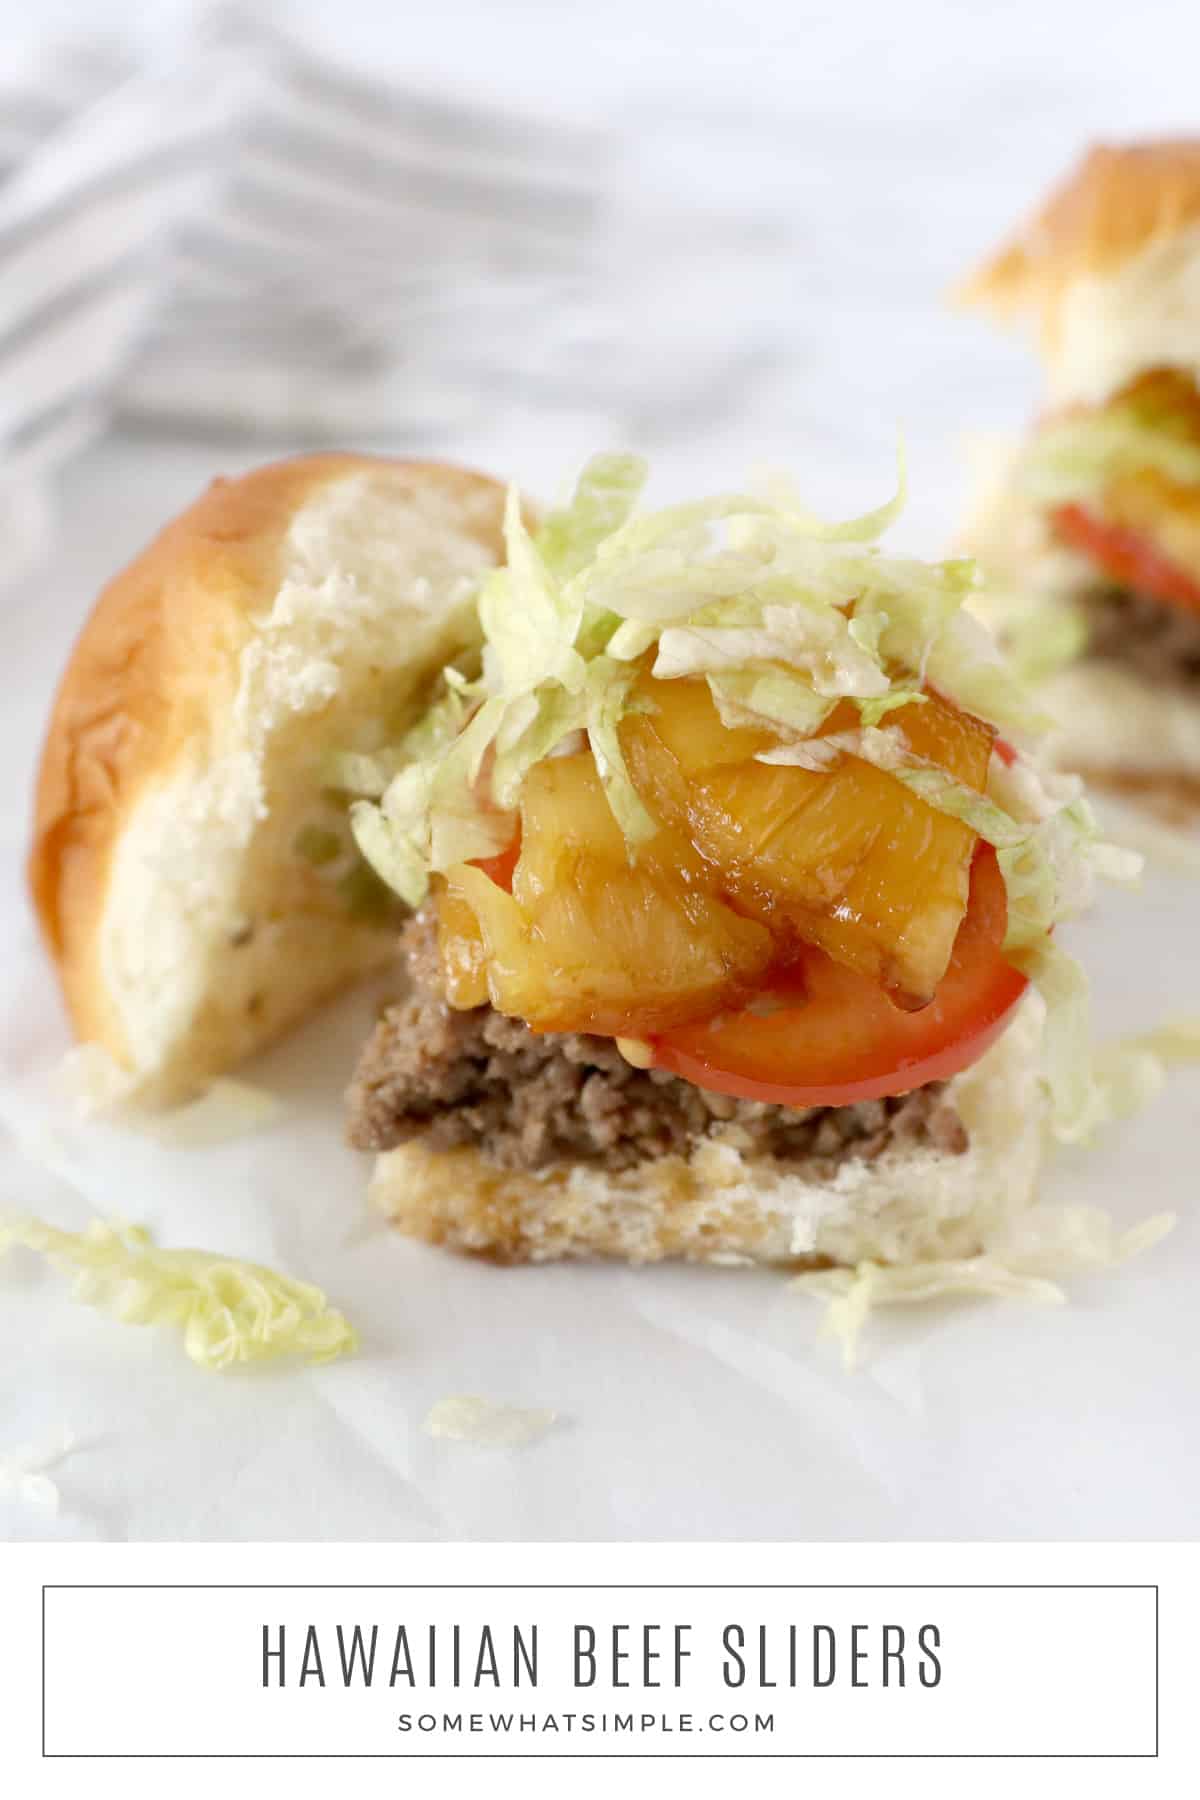 Tender juicy beef with grilled pineapple and teriyaki sauce sandwiched together on sweet Hawaiian rolls - these Hawaiian Beef Sliders are simple to make and they taste AMAZING! via @somewhatsimple